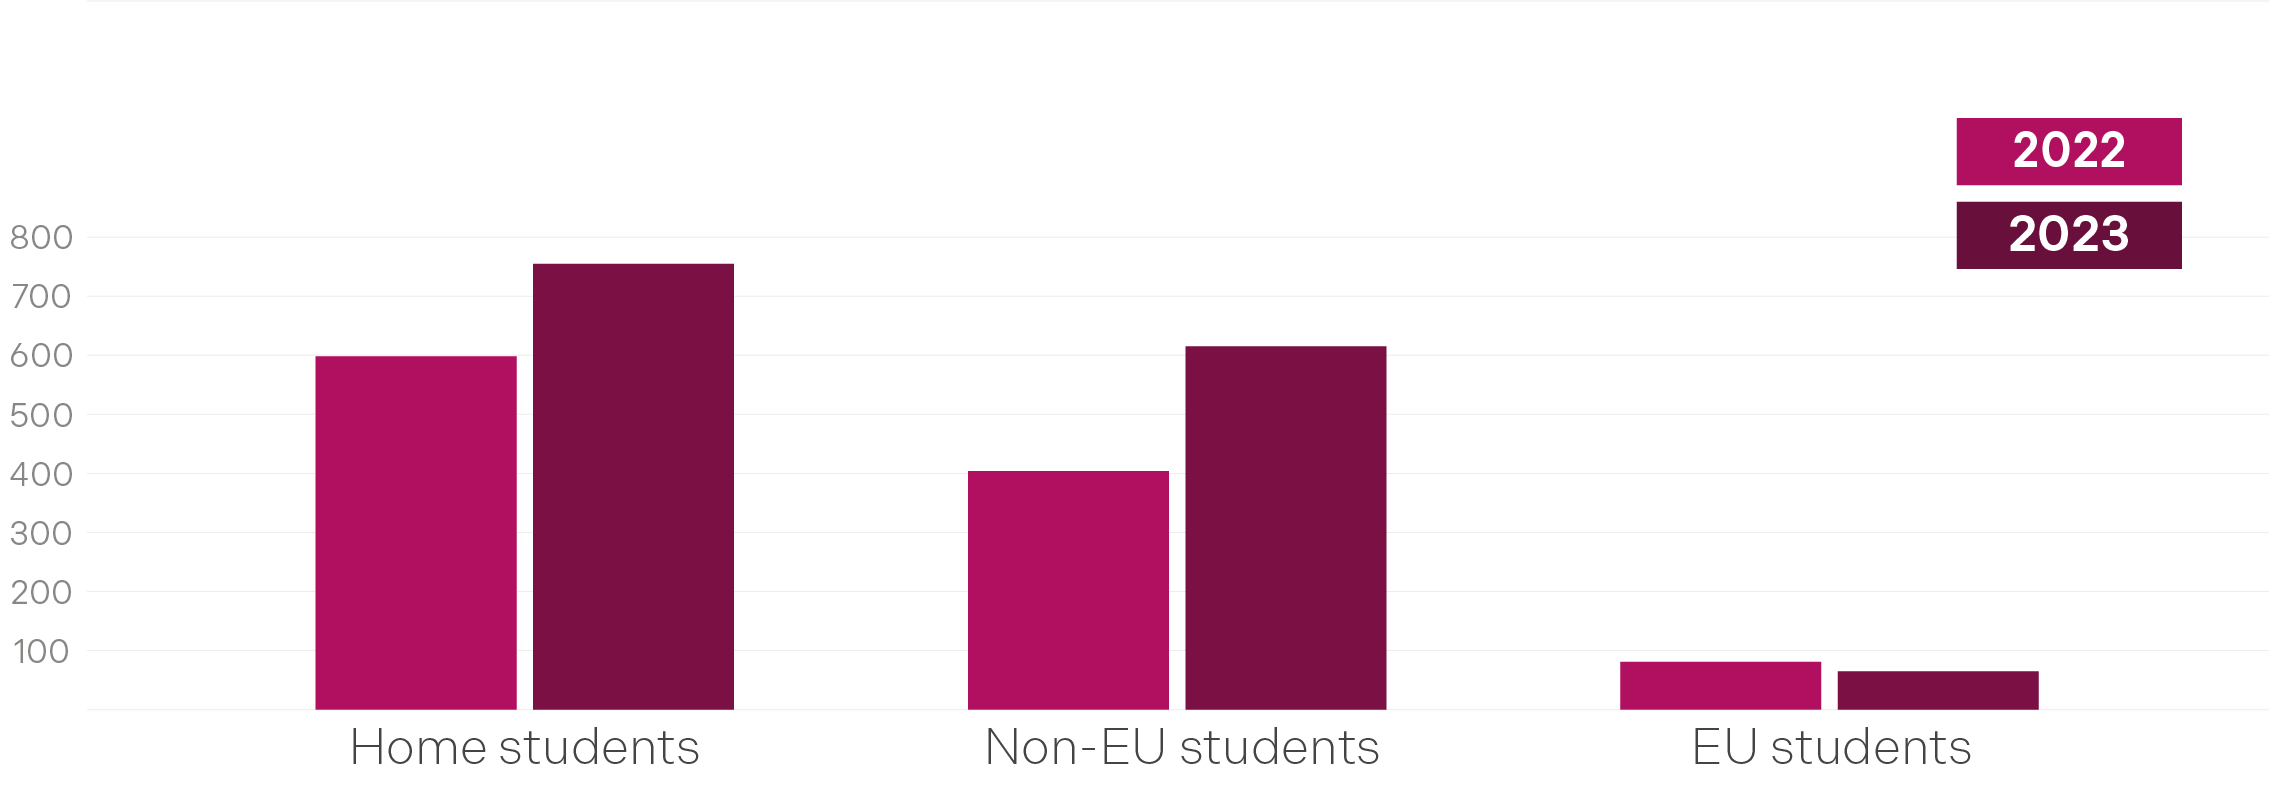 Bar chart showing the number of academic appeals received by student domicile